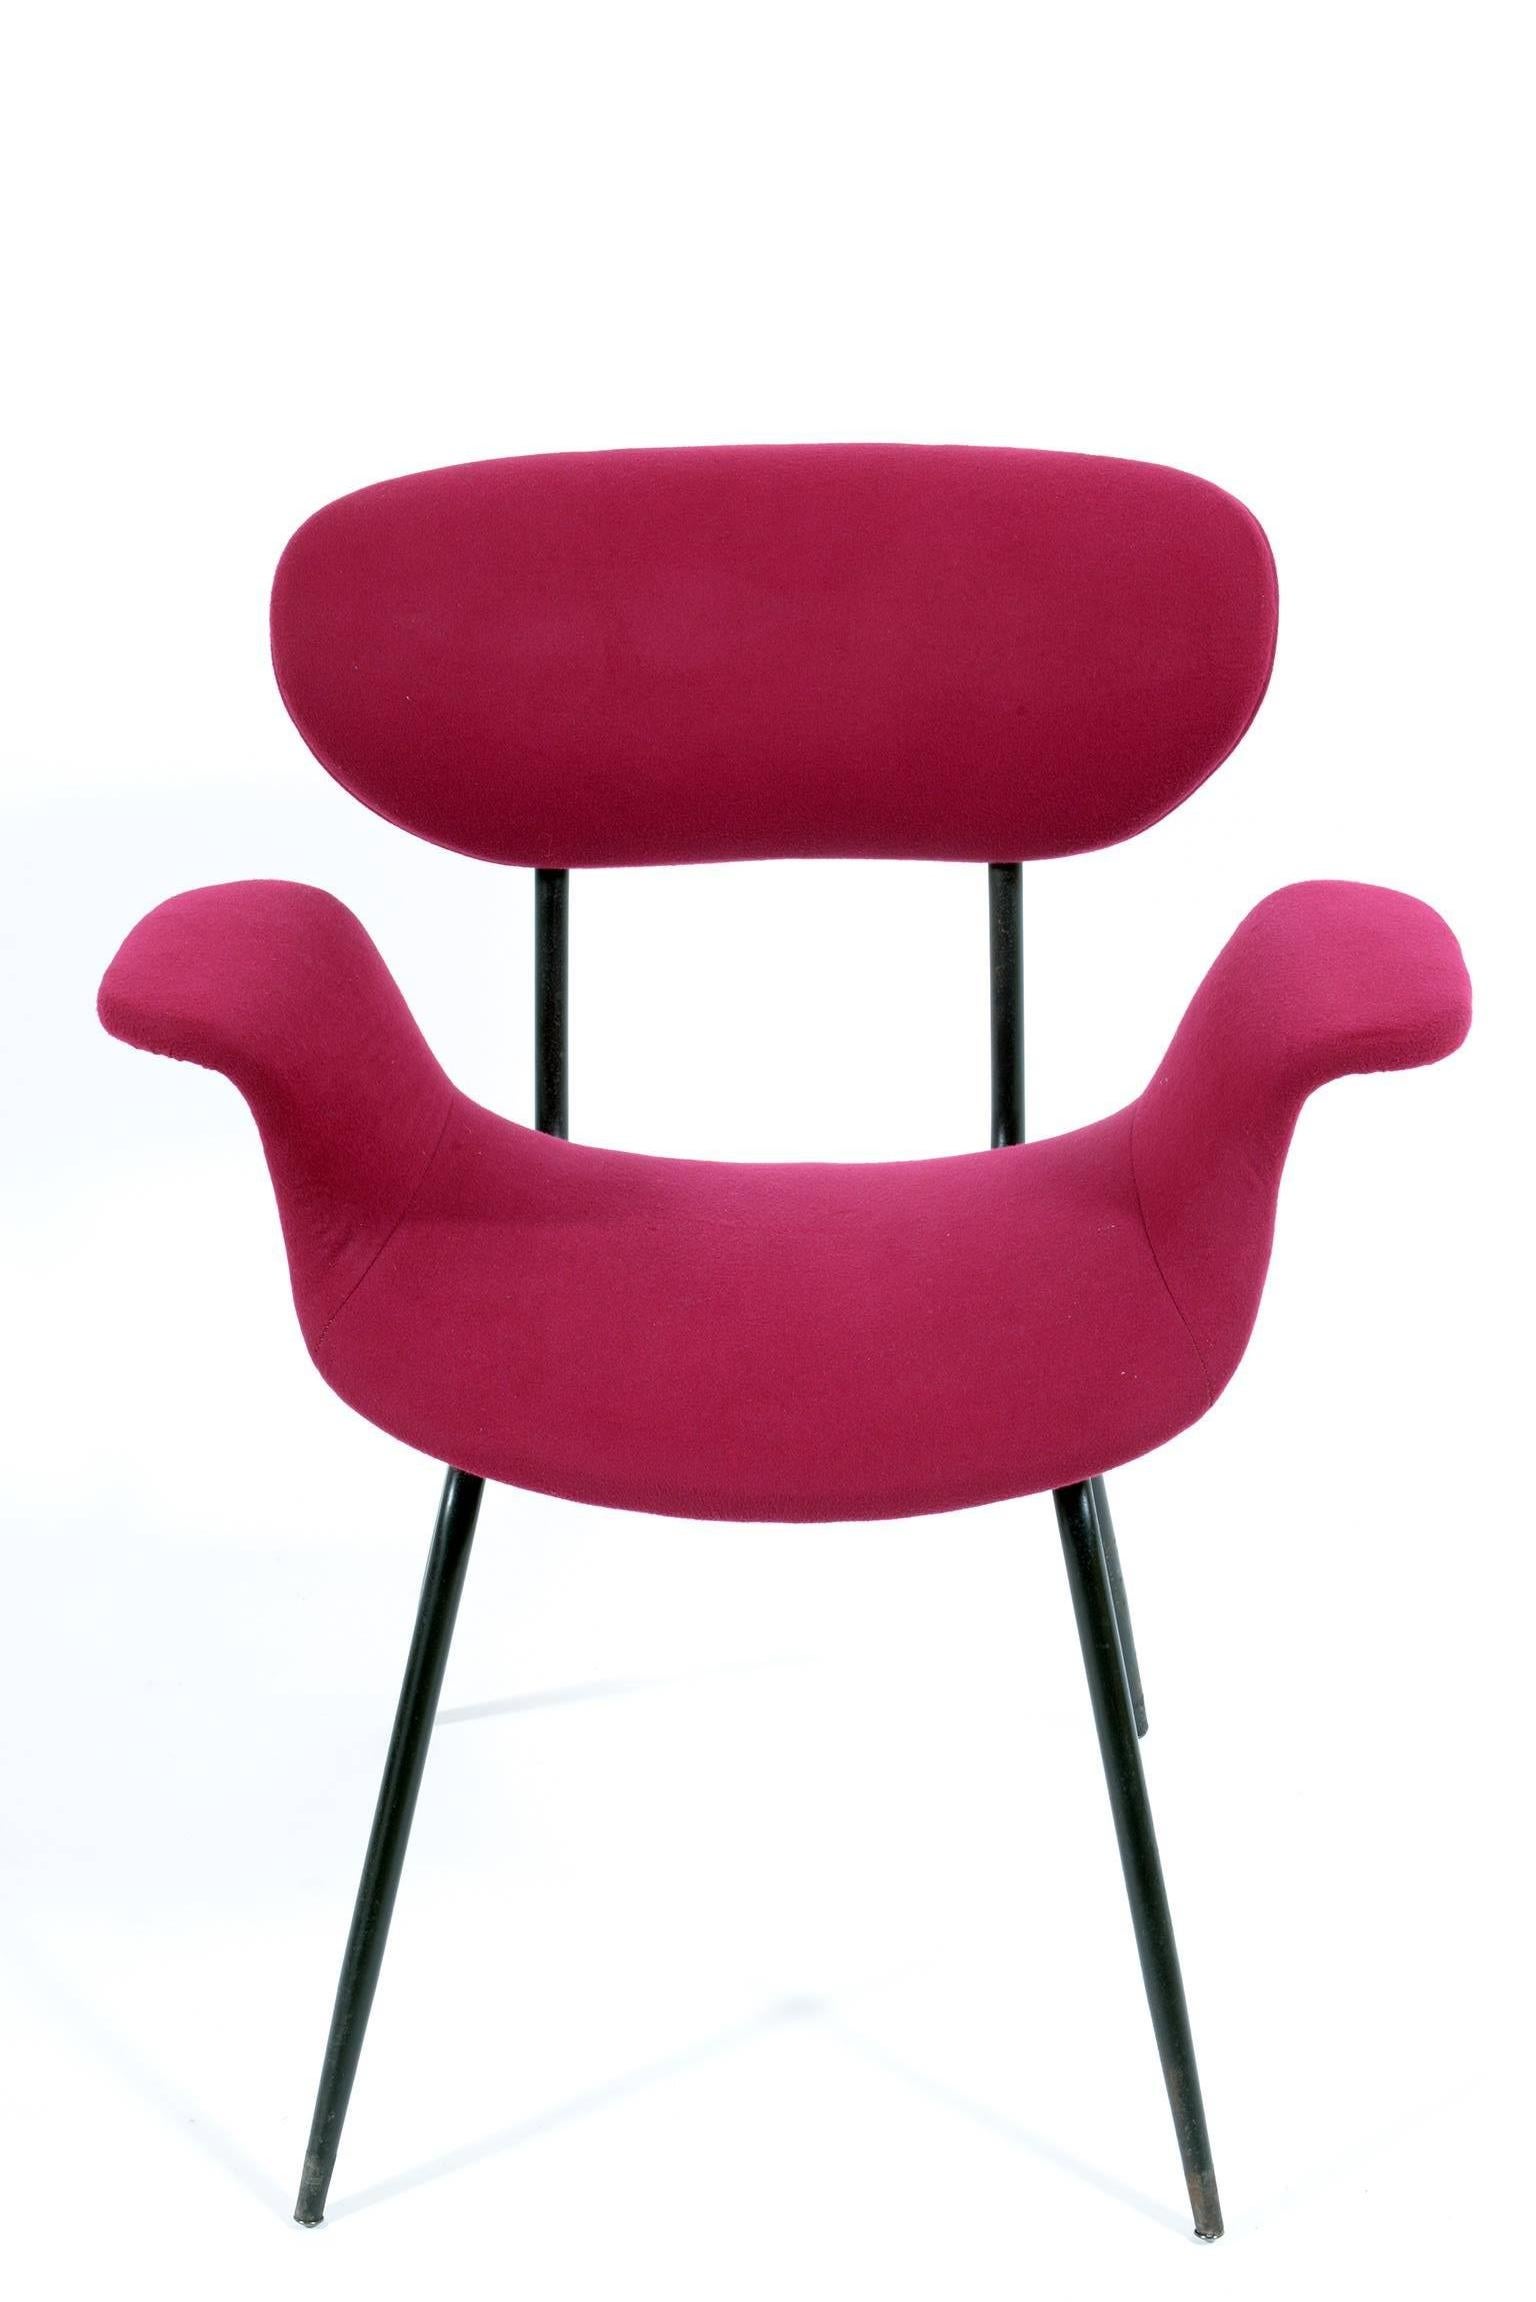 Curved rosewood plywood arms and metal black lacquered legs.
Original red cherry color fabric.
  